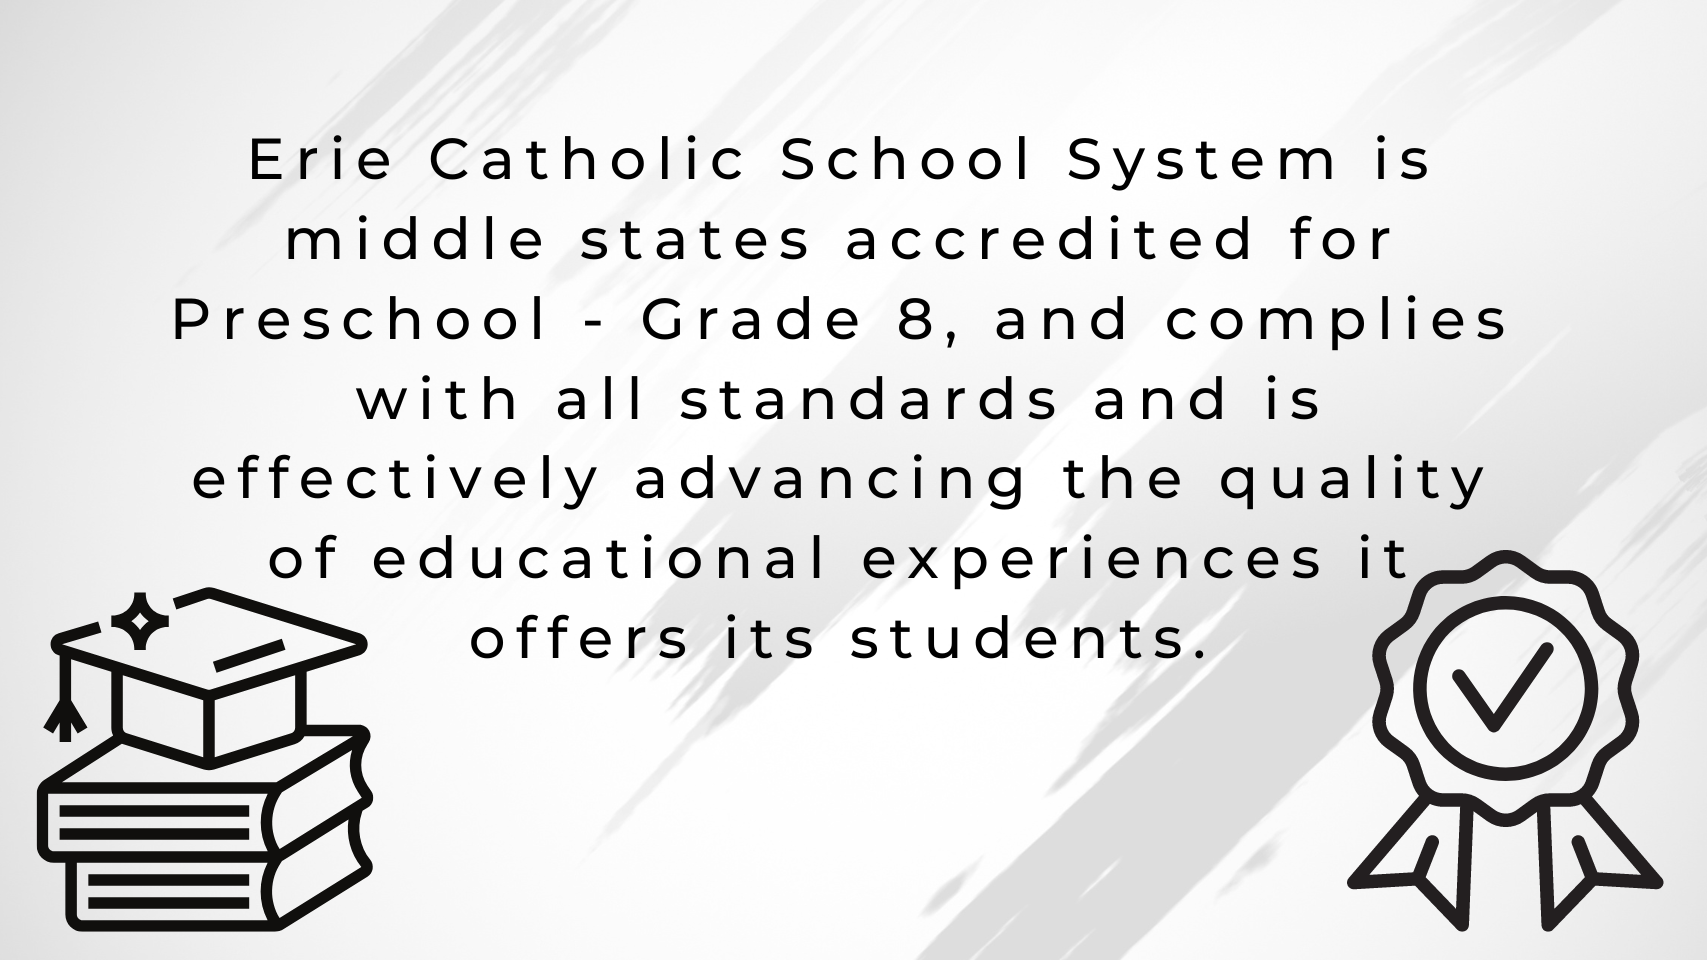 The erie catholic school system is middle states accredited for preschool grade 8 and complies with all standards